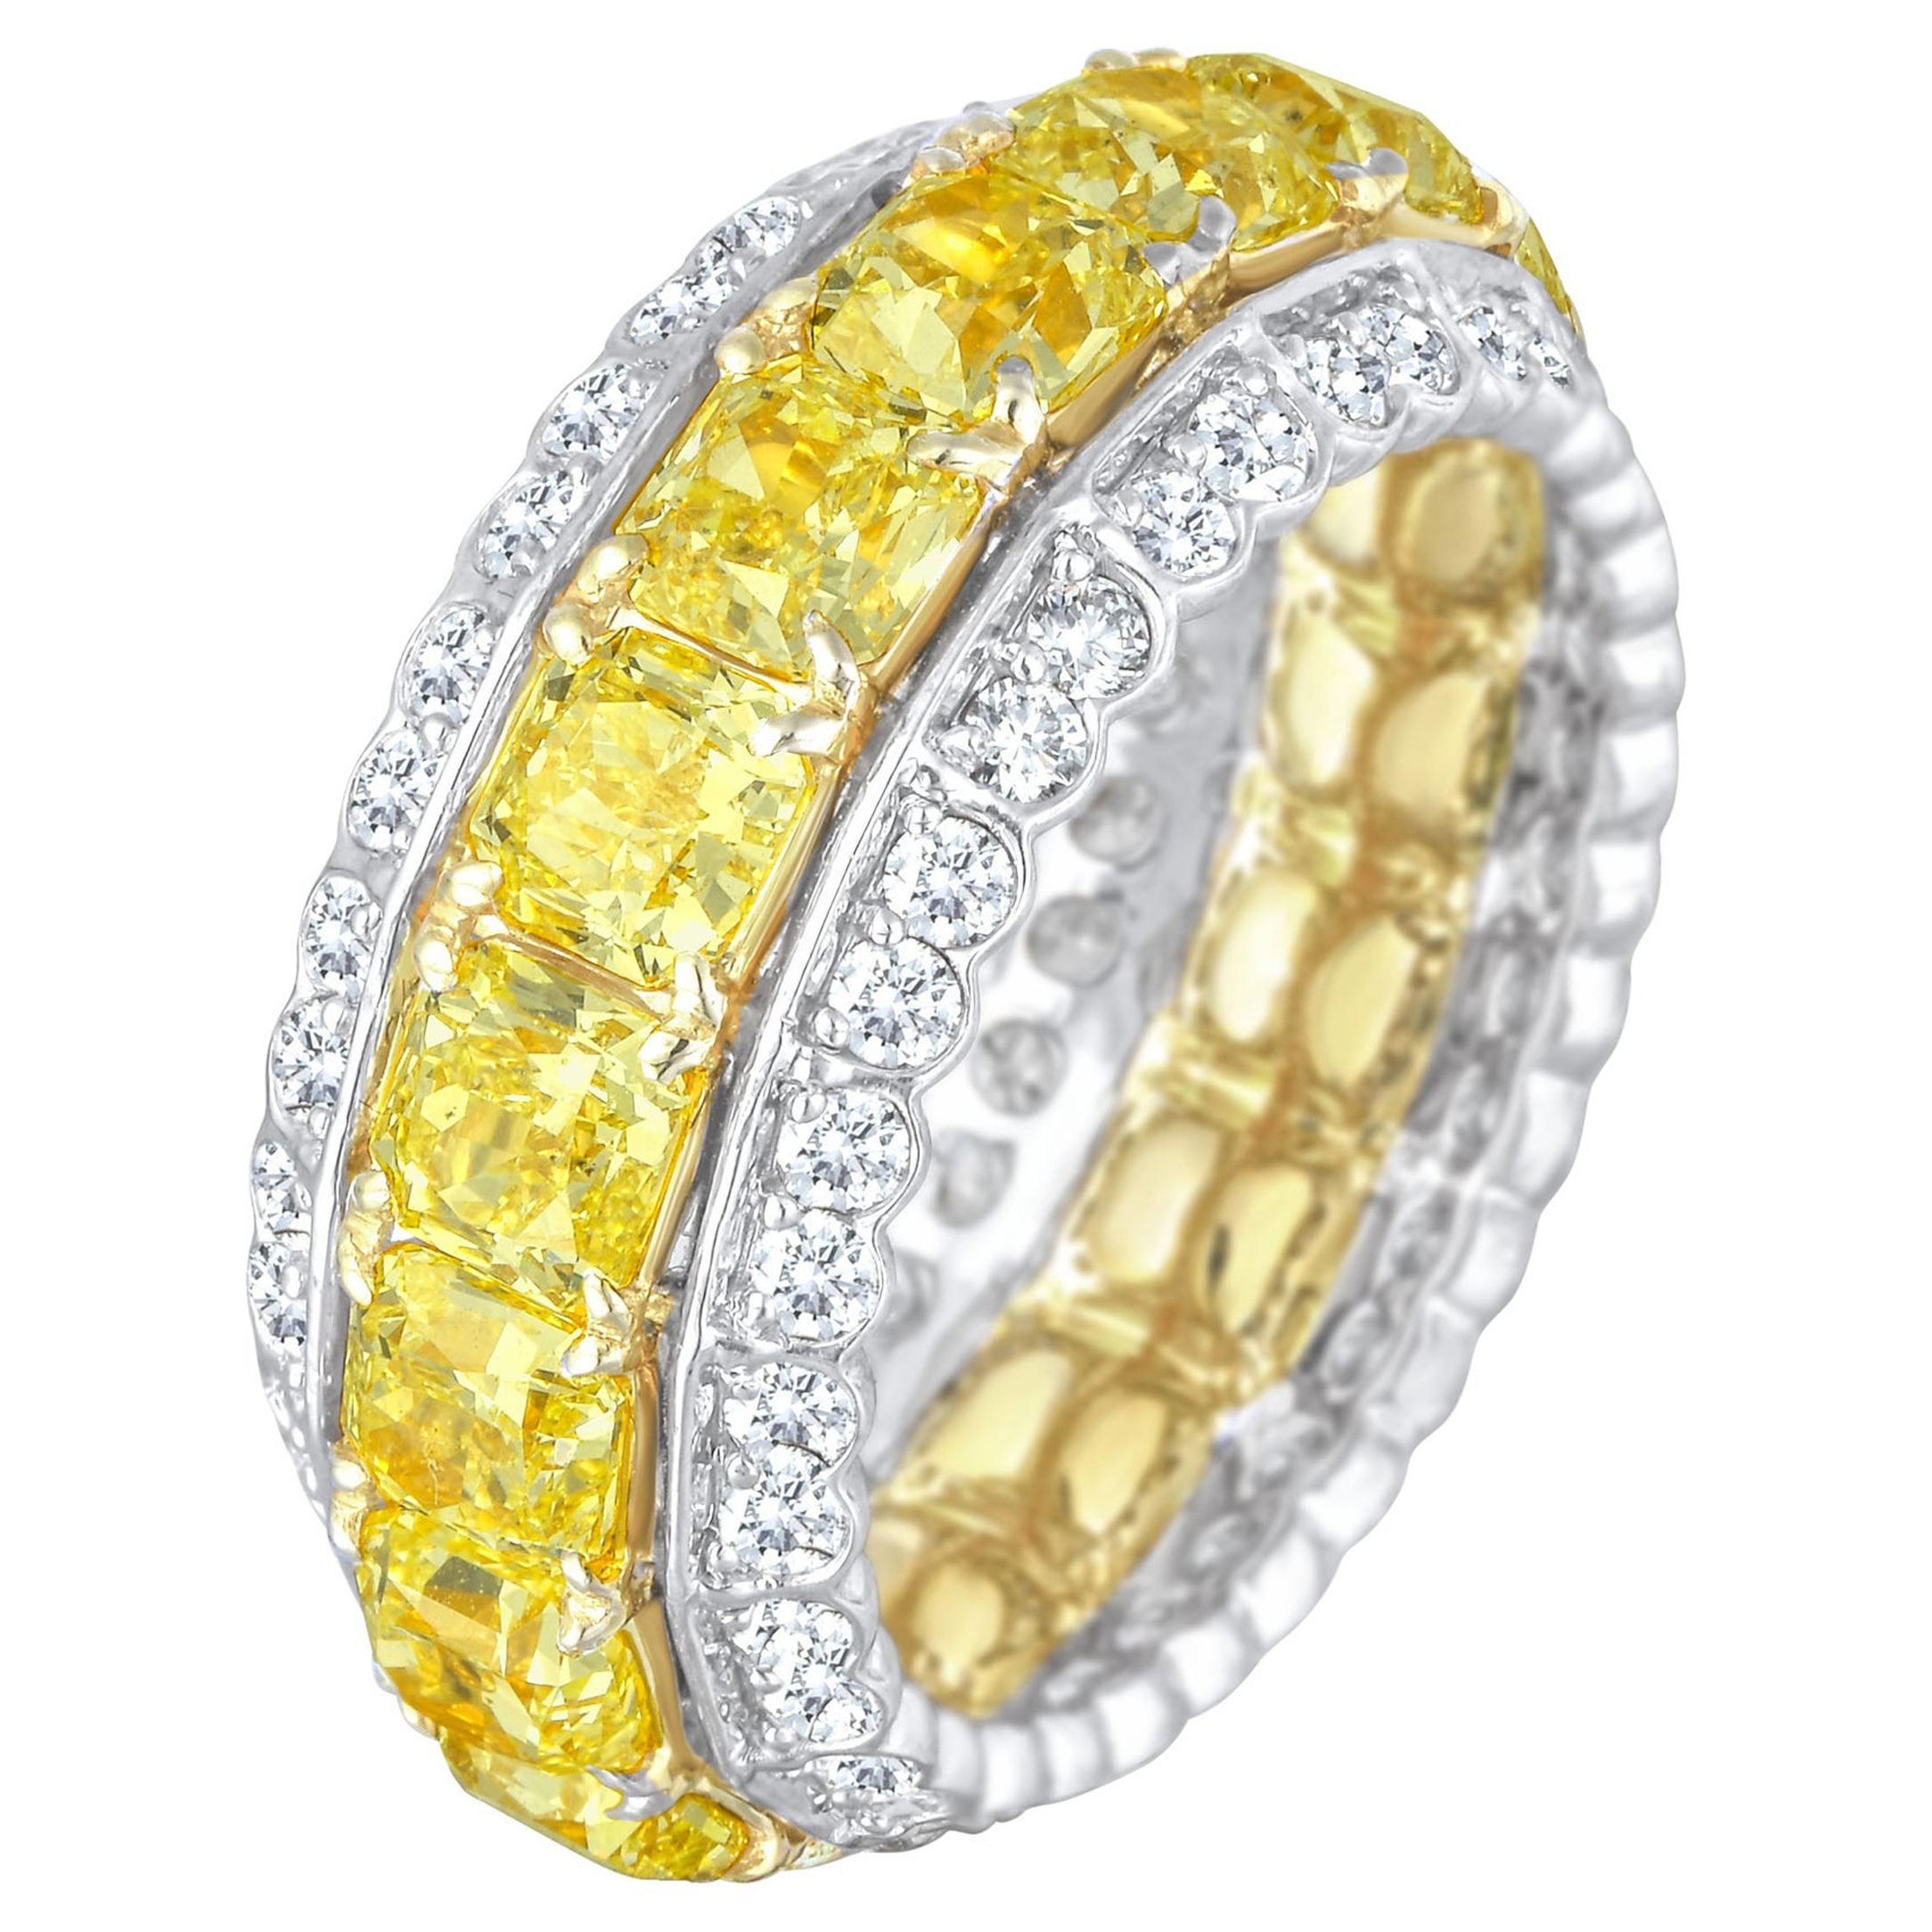 For Sale:  Eternity Band Half with Round Diamonds, 2.29 Carat